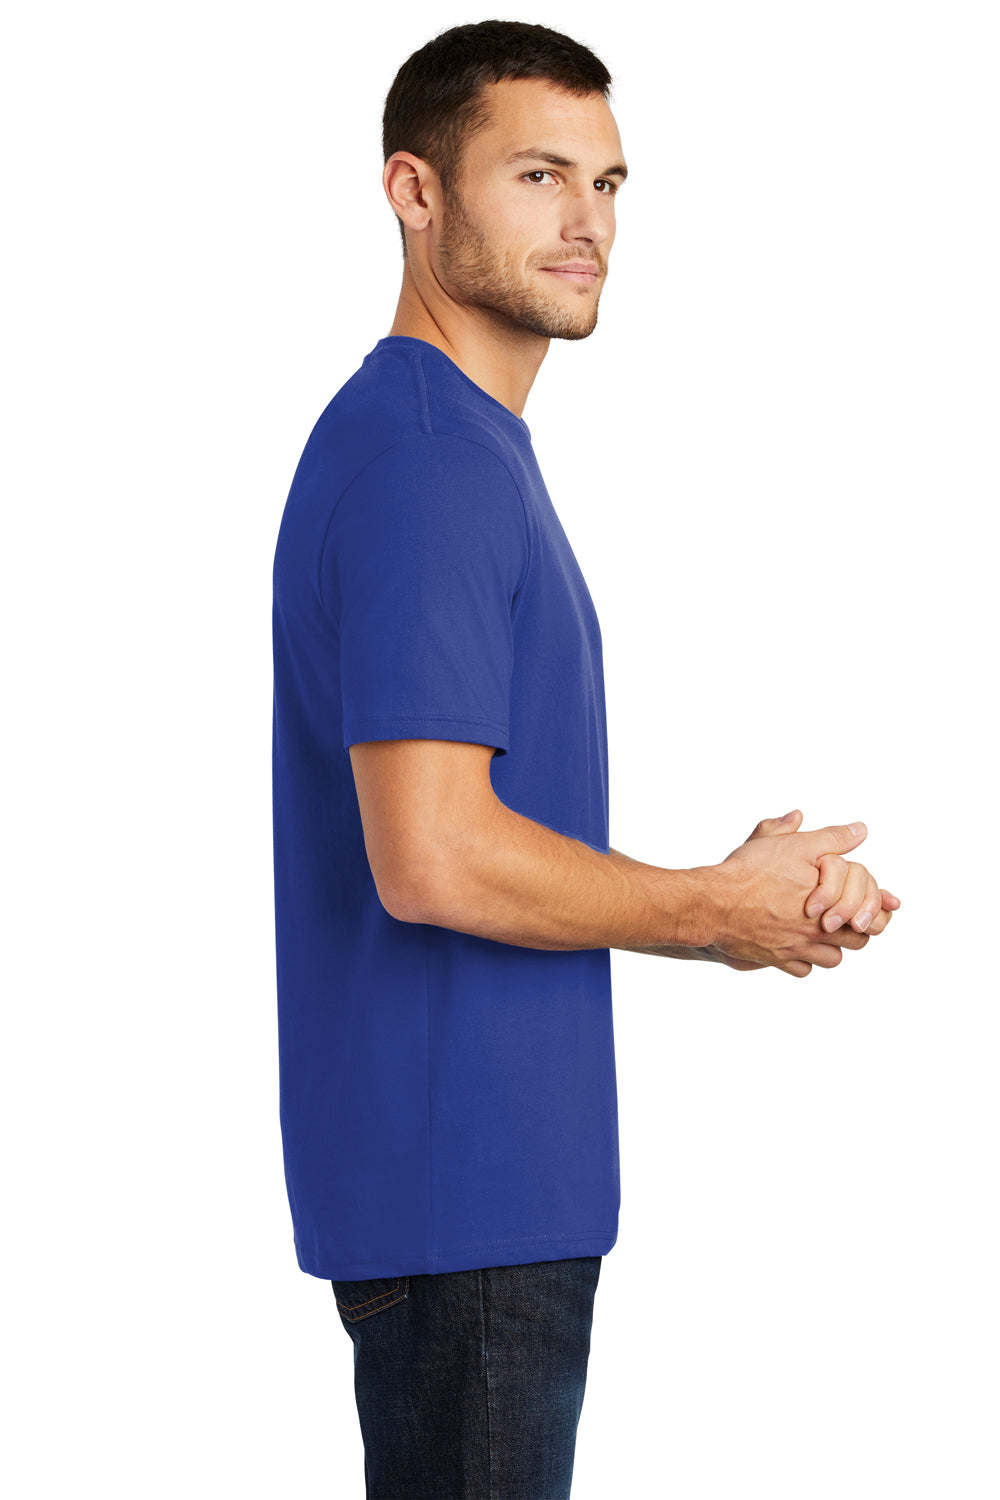 District DT104 Mens Perfect Weight Short Sleeve Crewneck T-Shirt Royal Blue Side